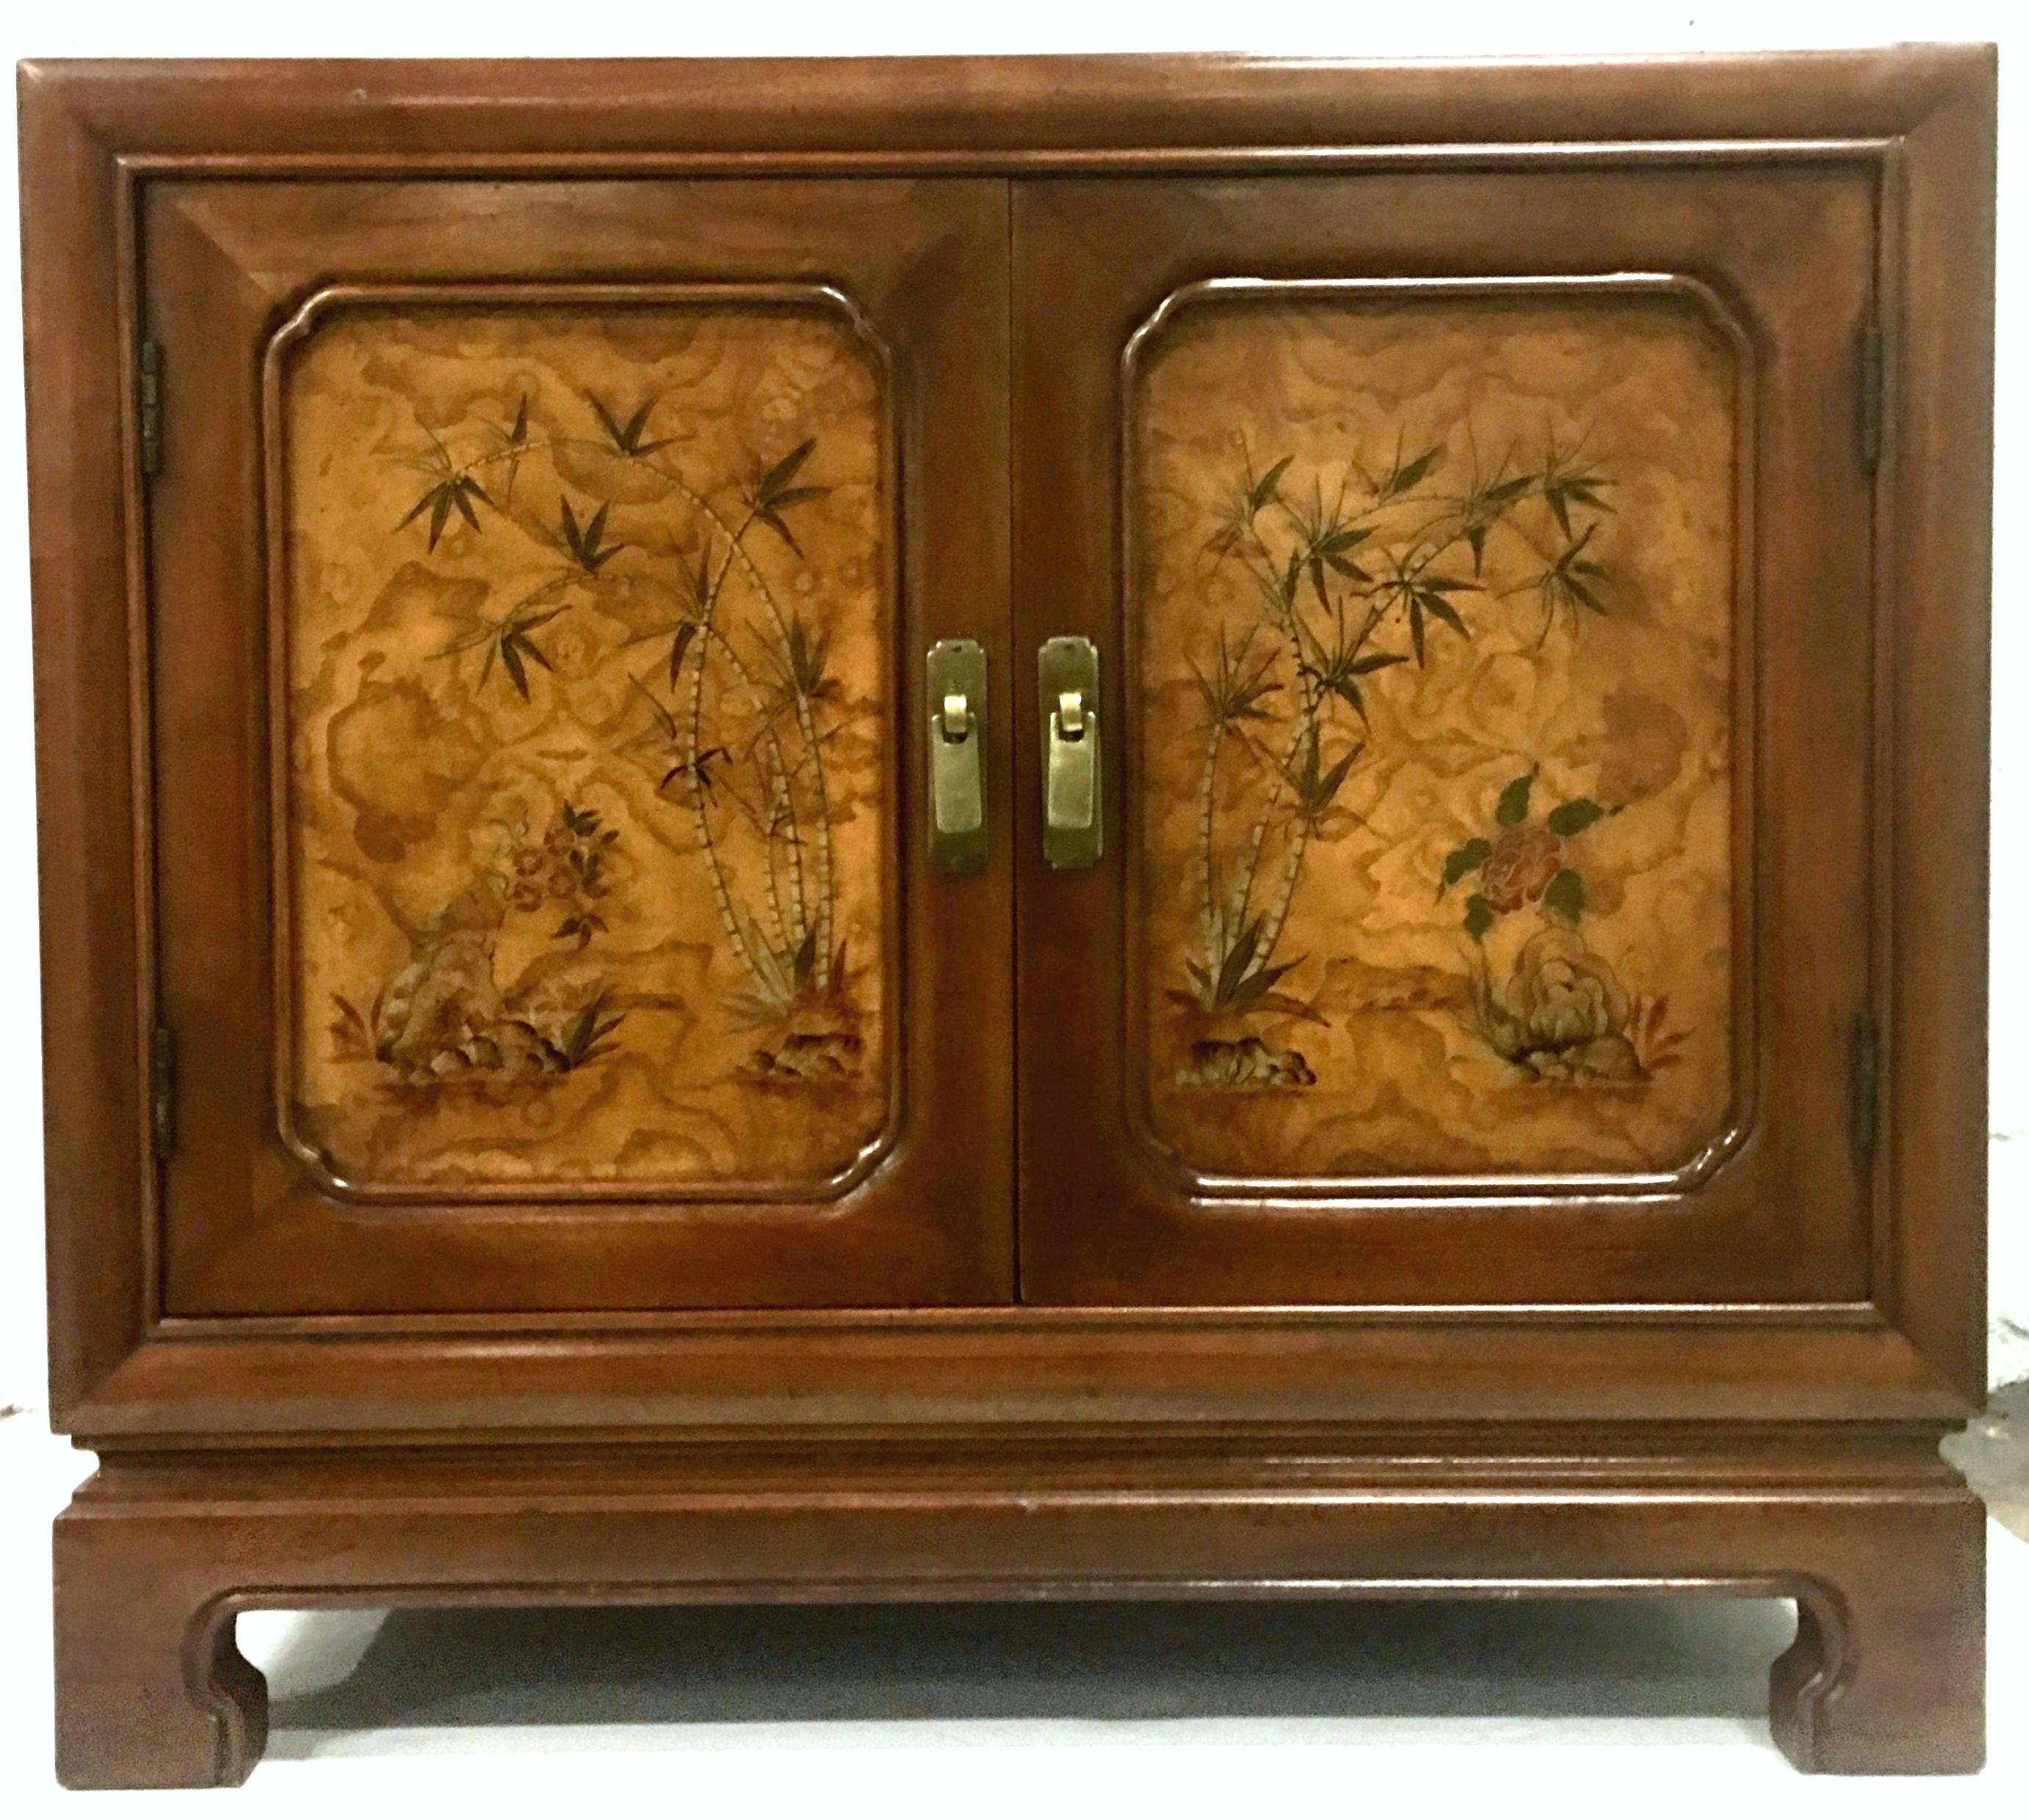 20th Century Pair of Walnut & Burl Wood Oriental Nightstands by, John Widdicomb In Good Condition For Sale In West Palm Beach, FL